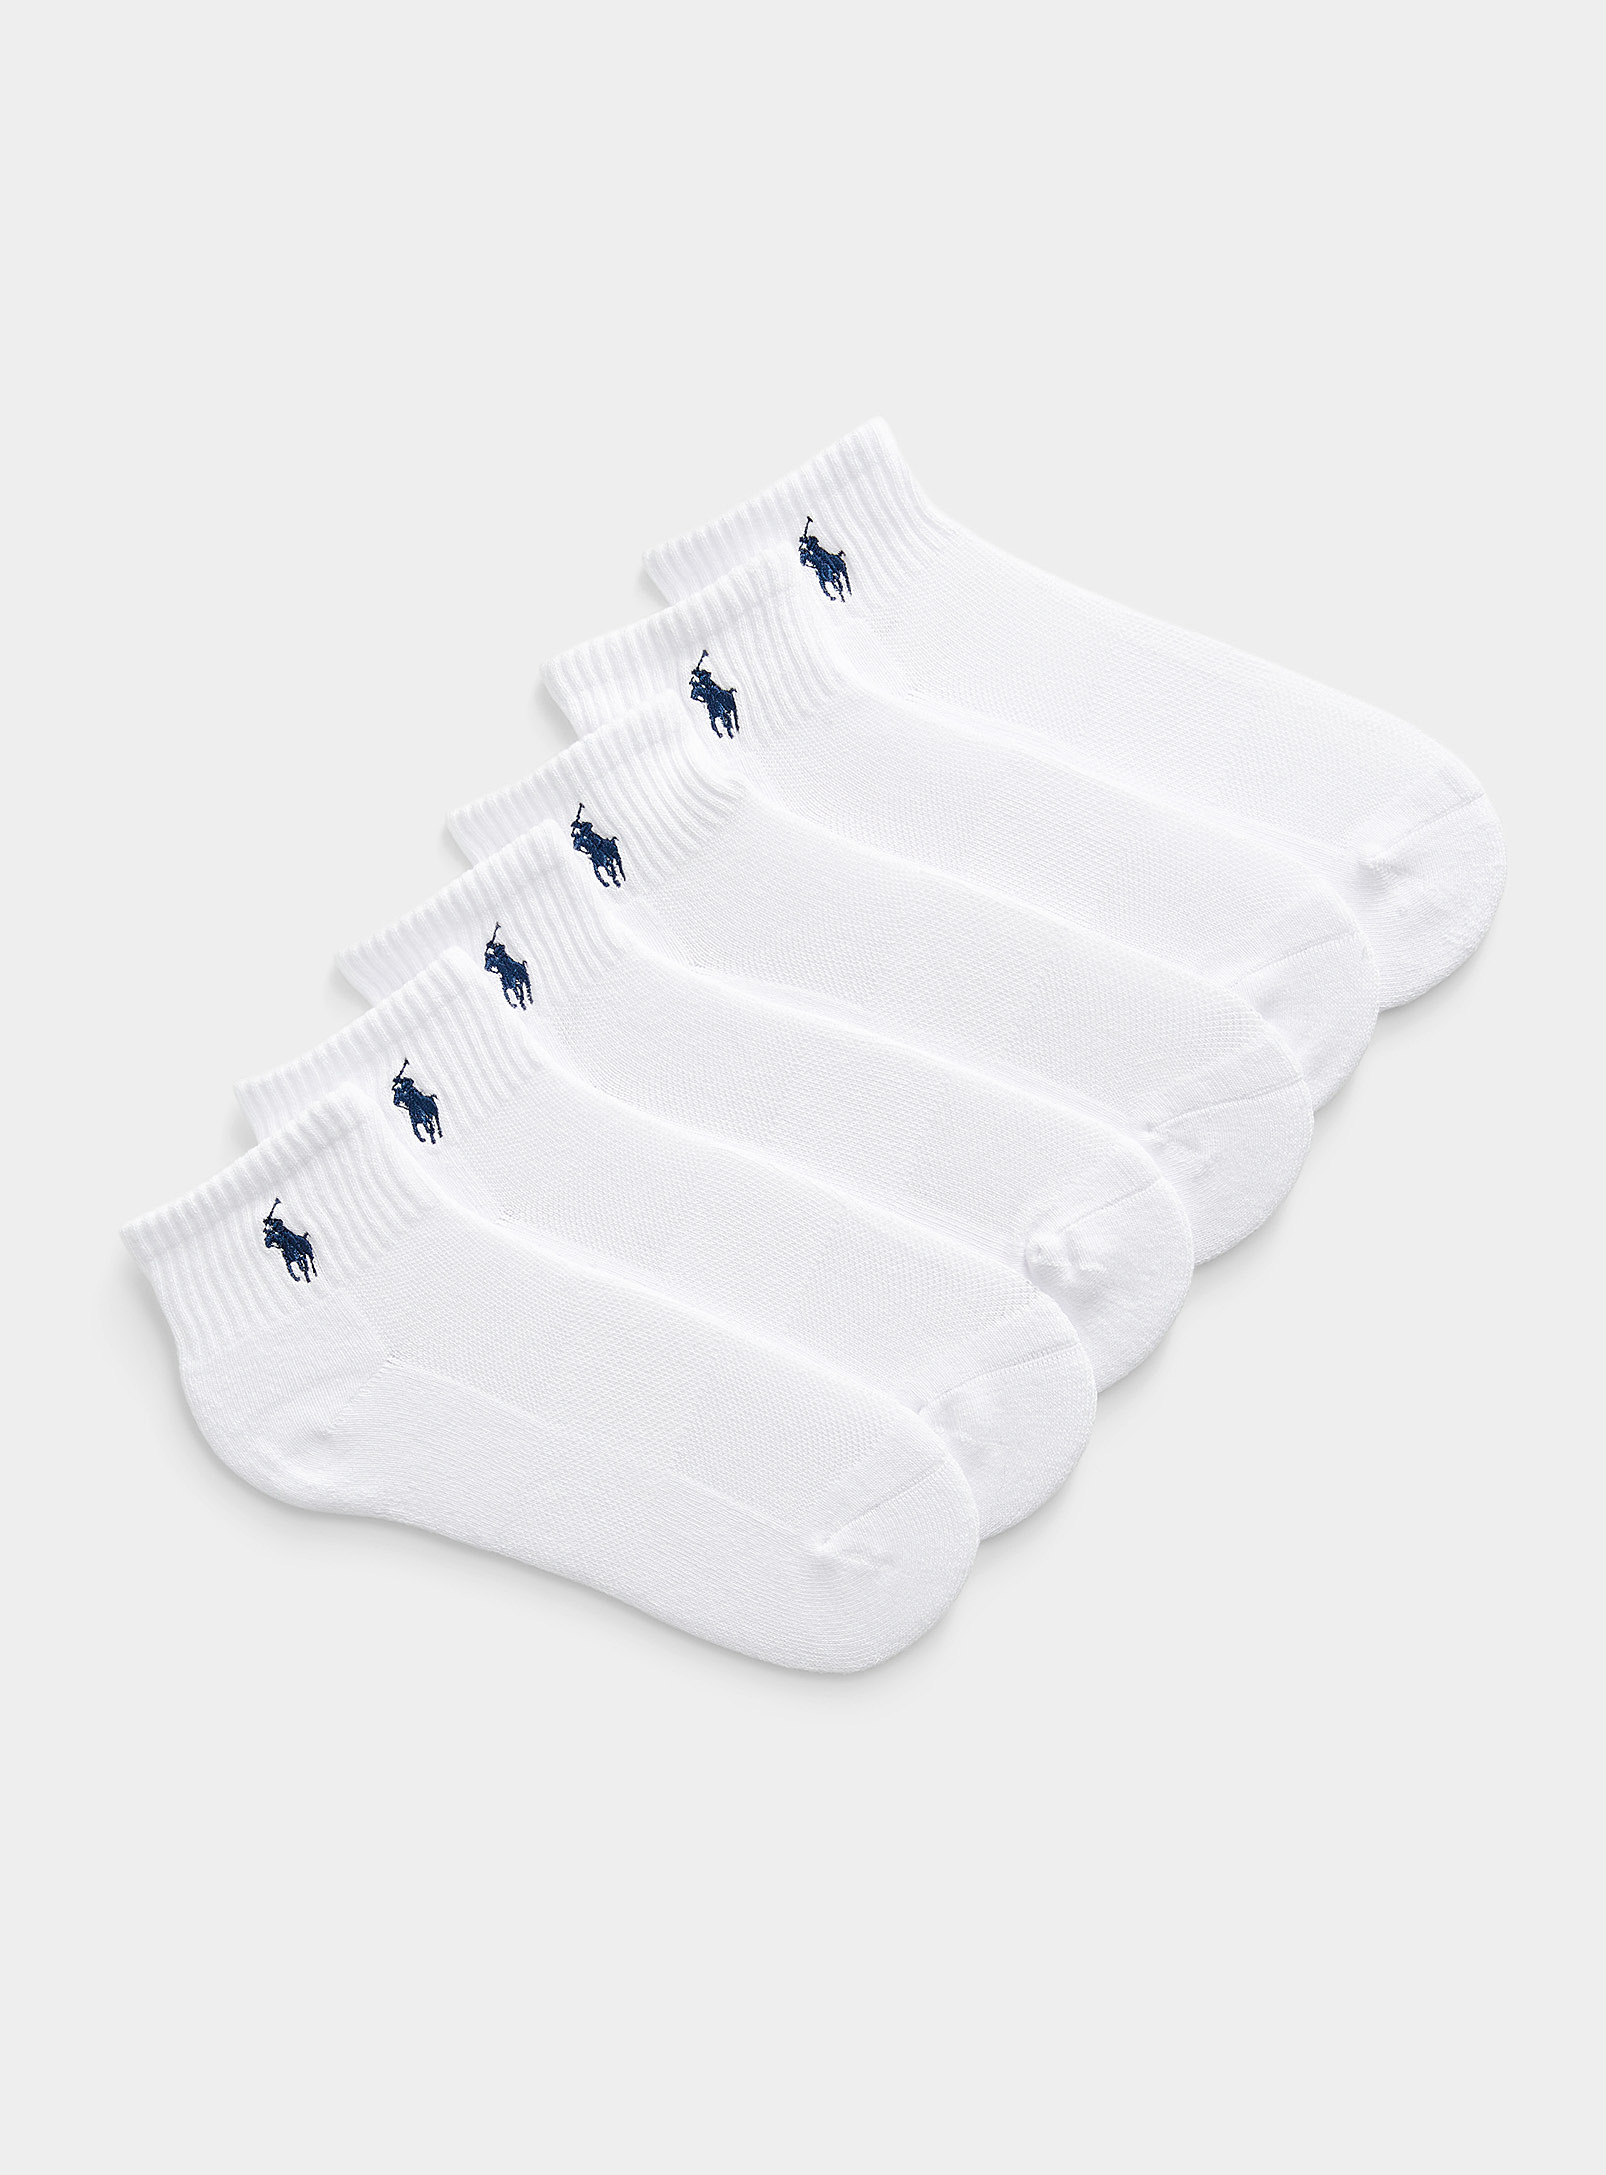 Polo Ralph Lauren Embroidered Logo Ankle Socks Set Of 6 Pairs In White